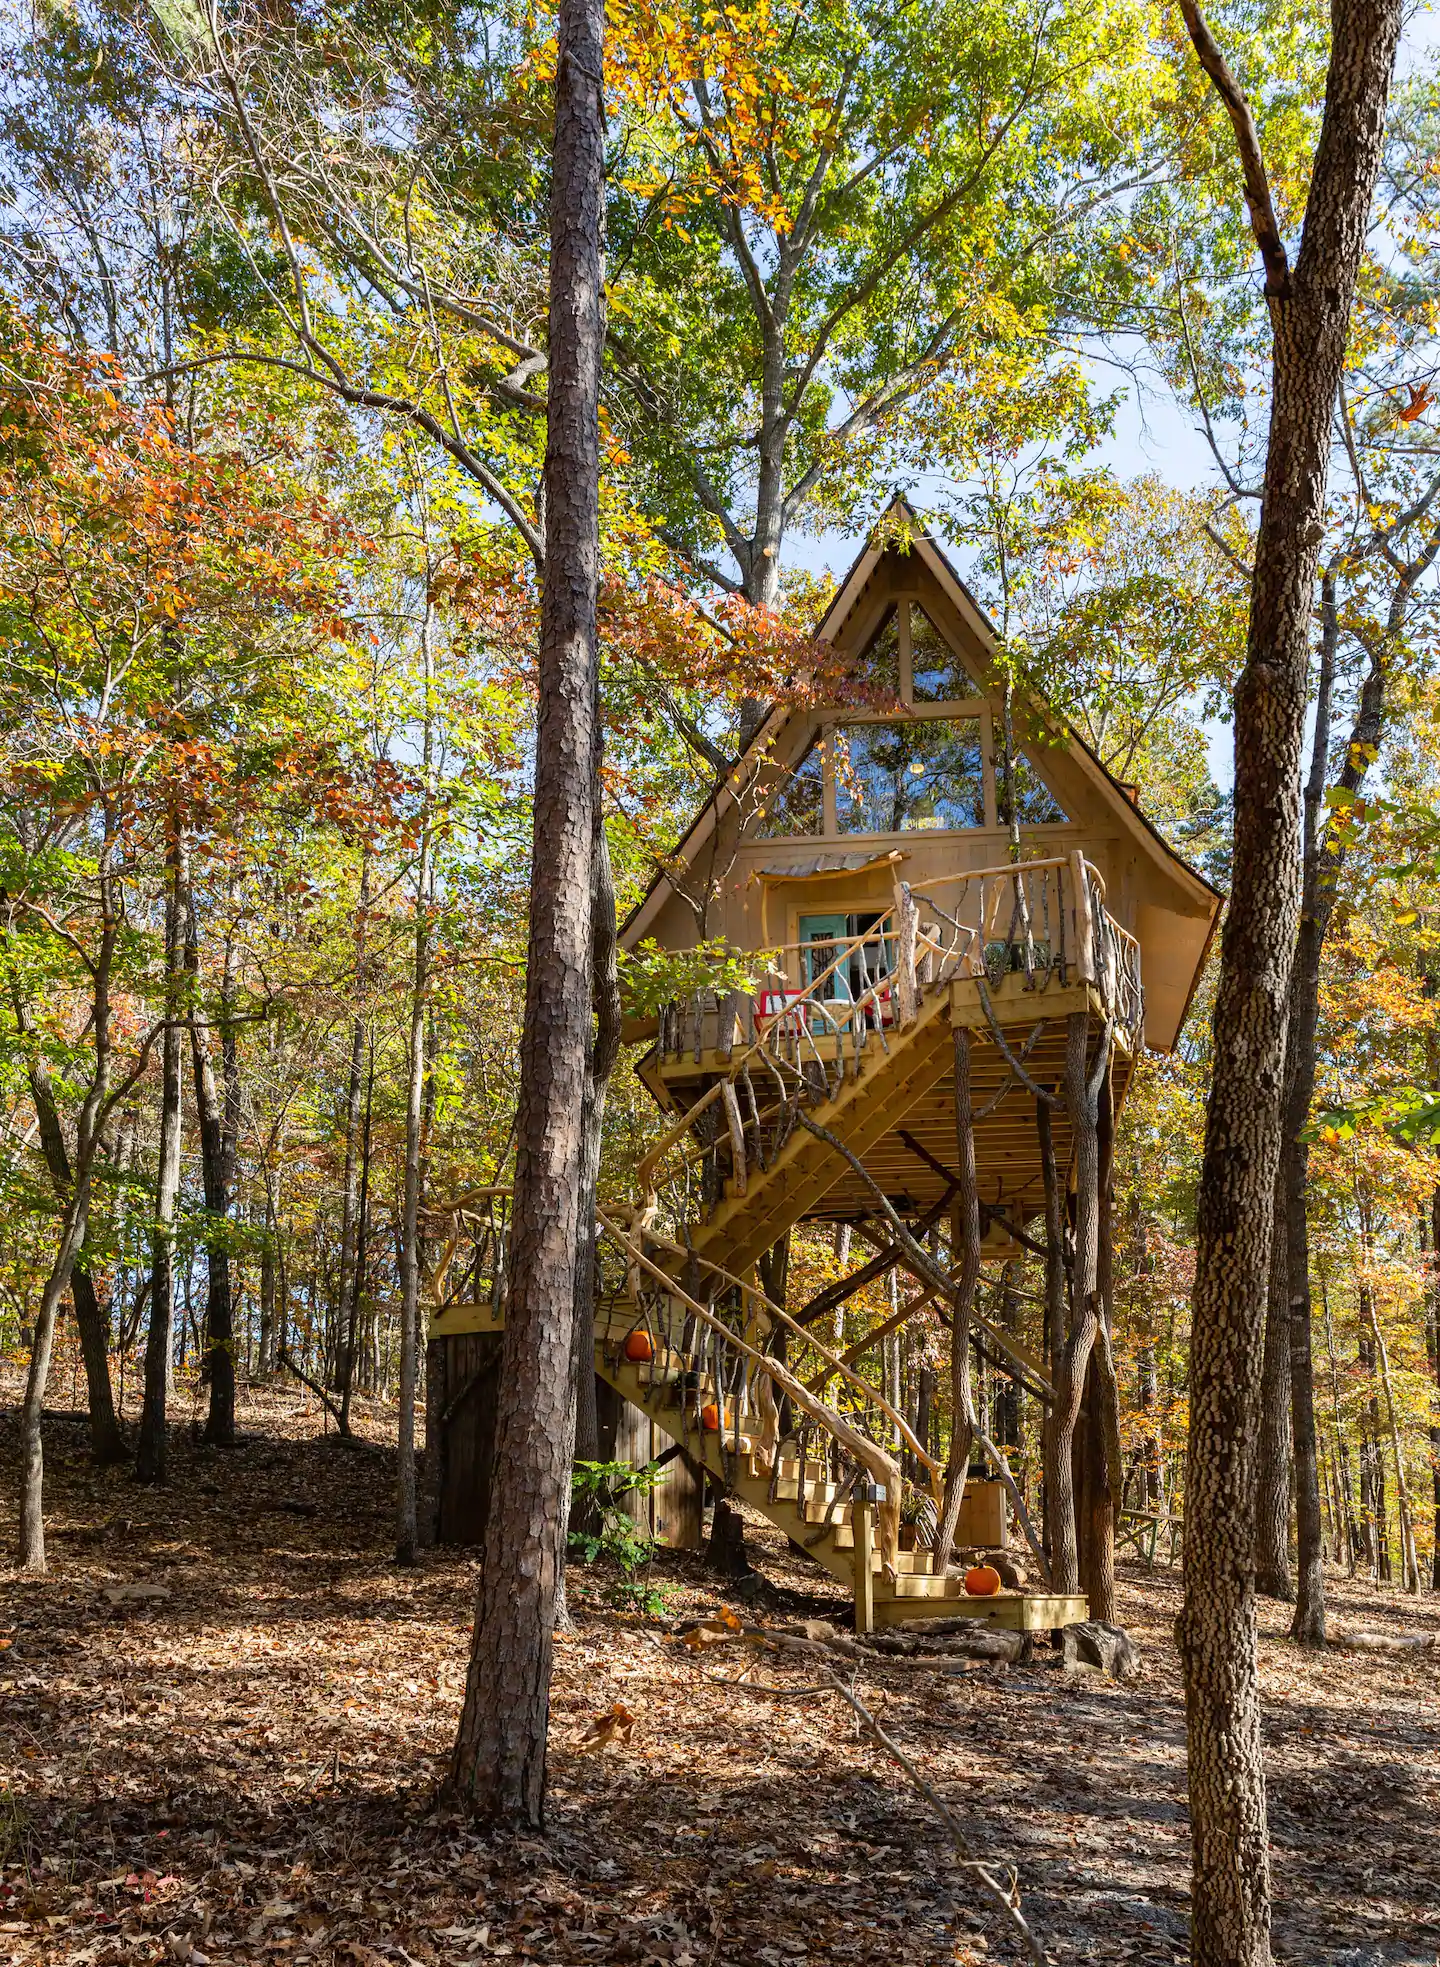 Photo of the exterior of Bed and Bough, which is an Airbnb treehouse in Georgia.